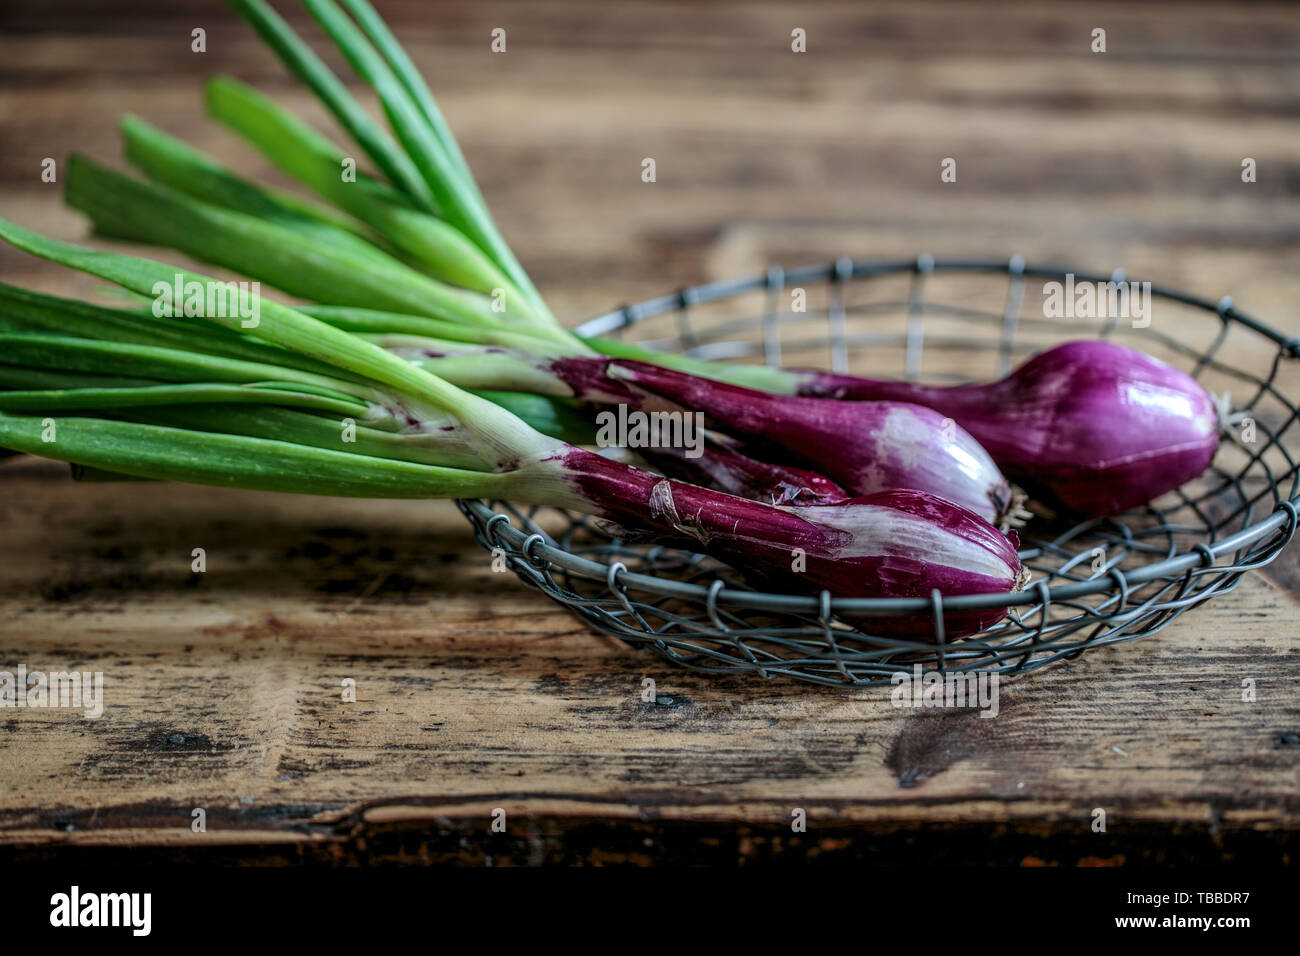 Studio Still Life with fresh Scallions or Spring Onions Stock Photo